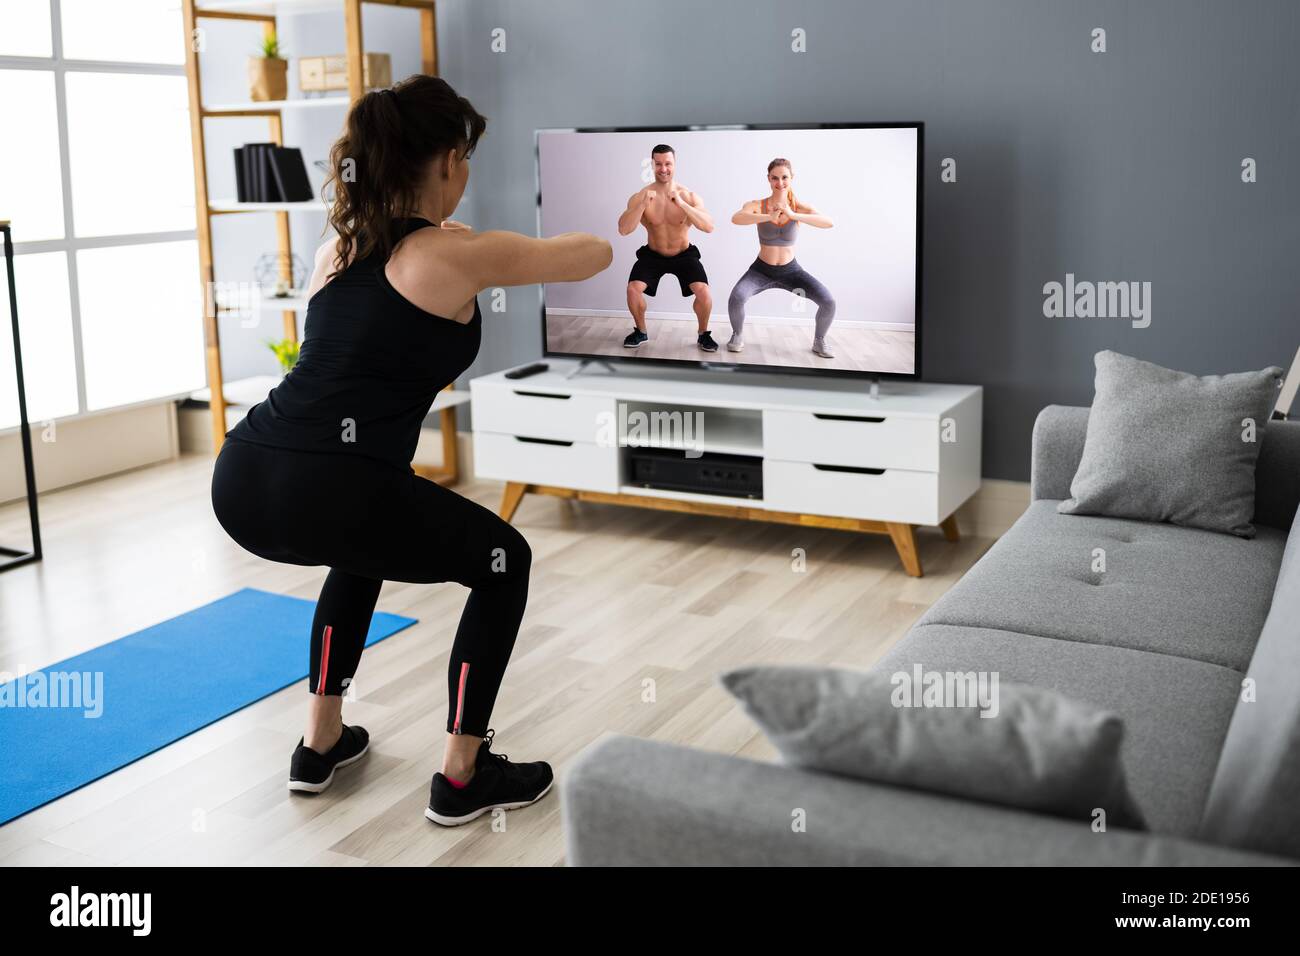 Online TV Home Fitness Workout And Exercise Stock Photo